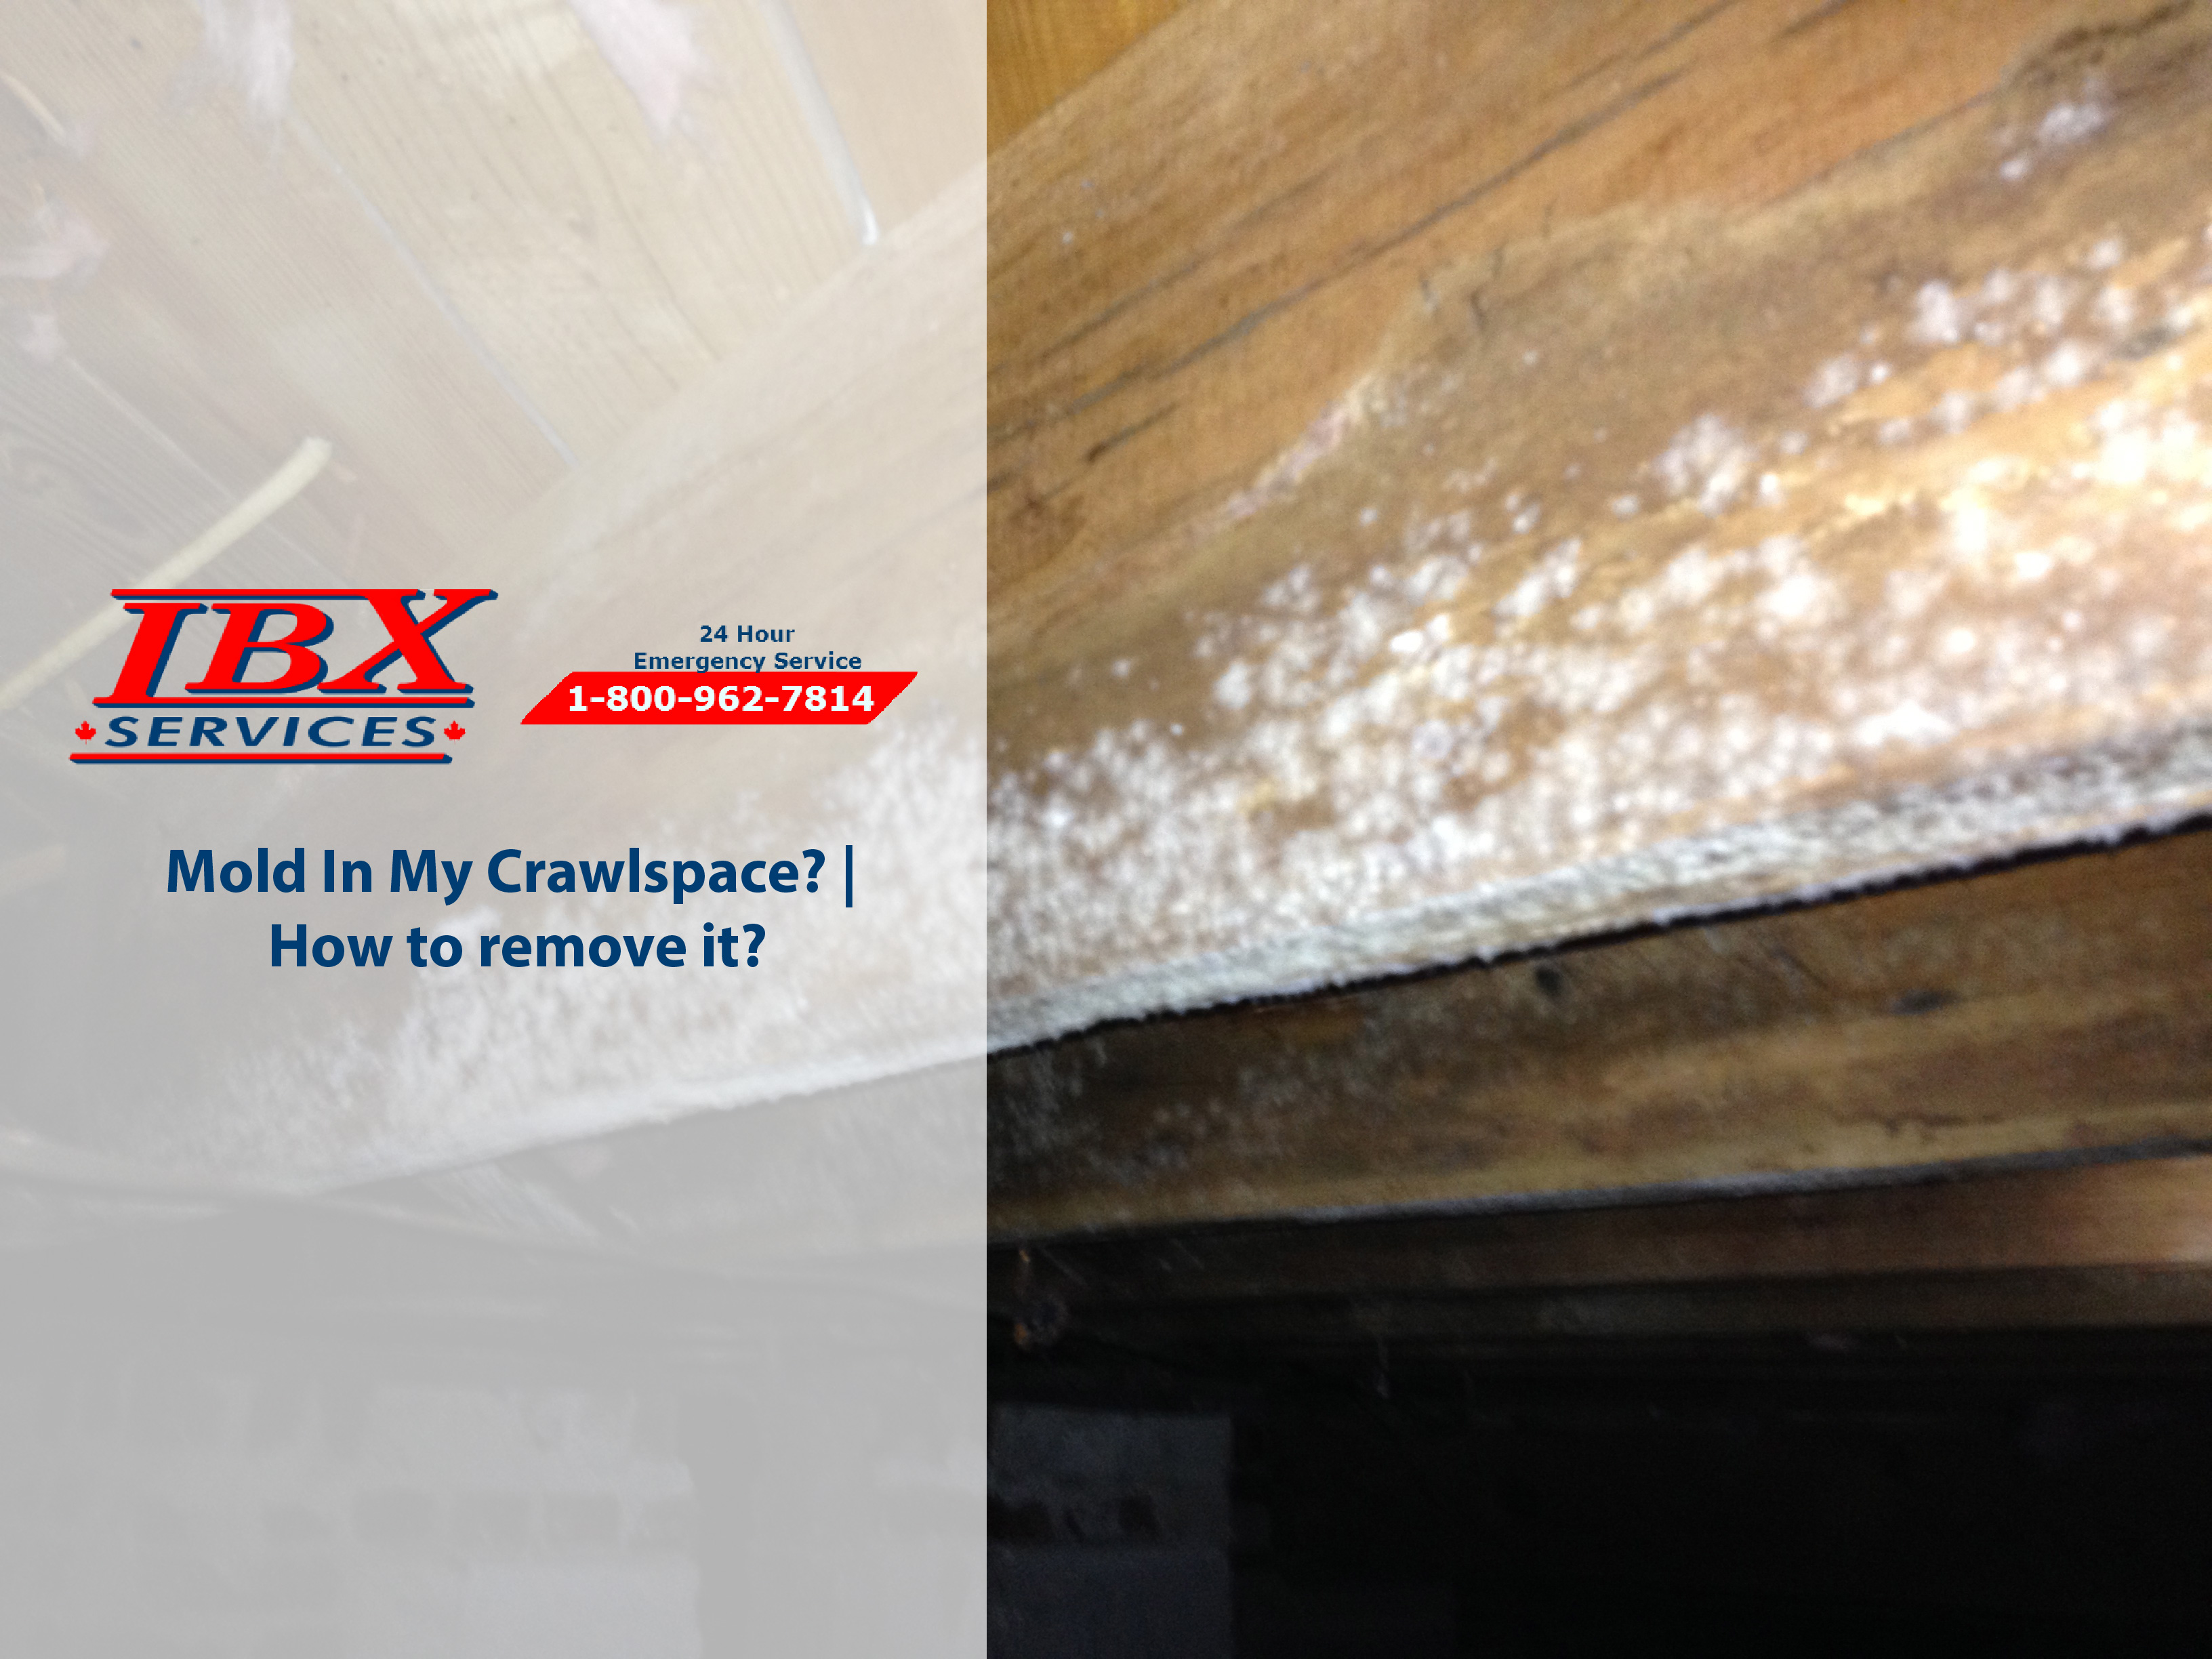 Mold In My Crawlspace? | How to remove it?